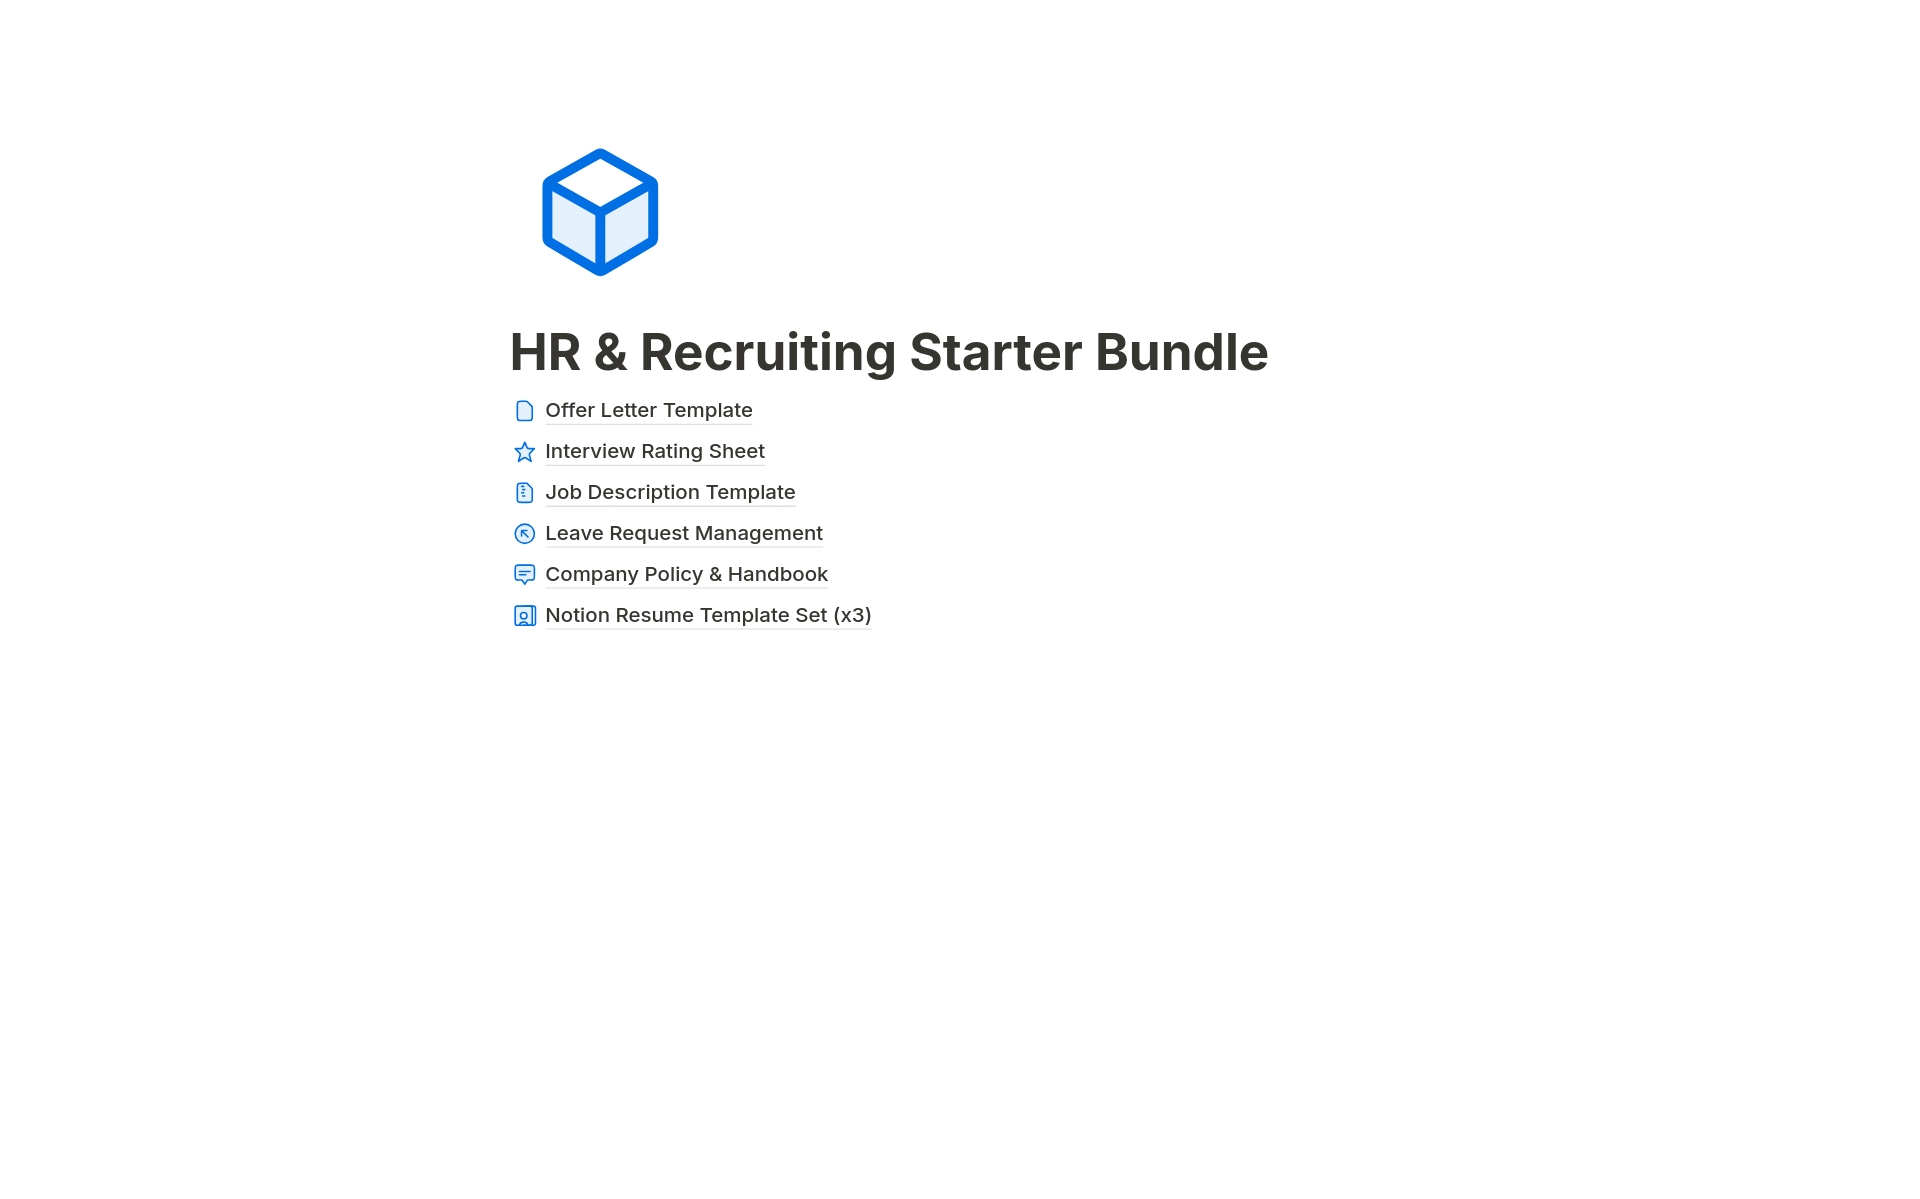 A template preview for HR & Recruiting Starter Bundle